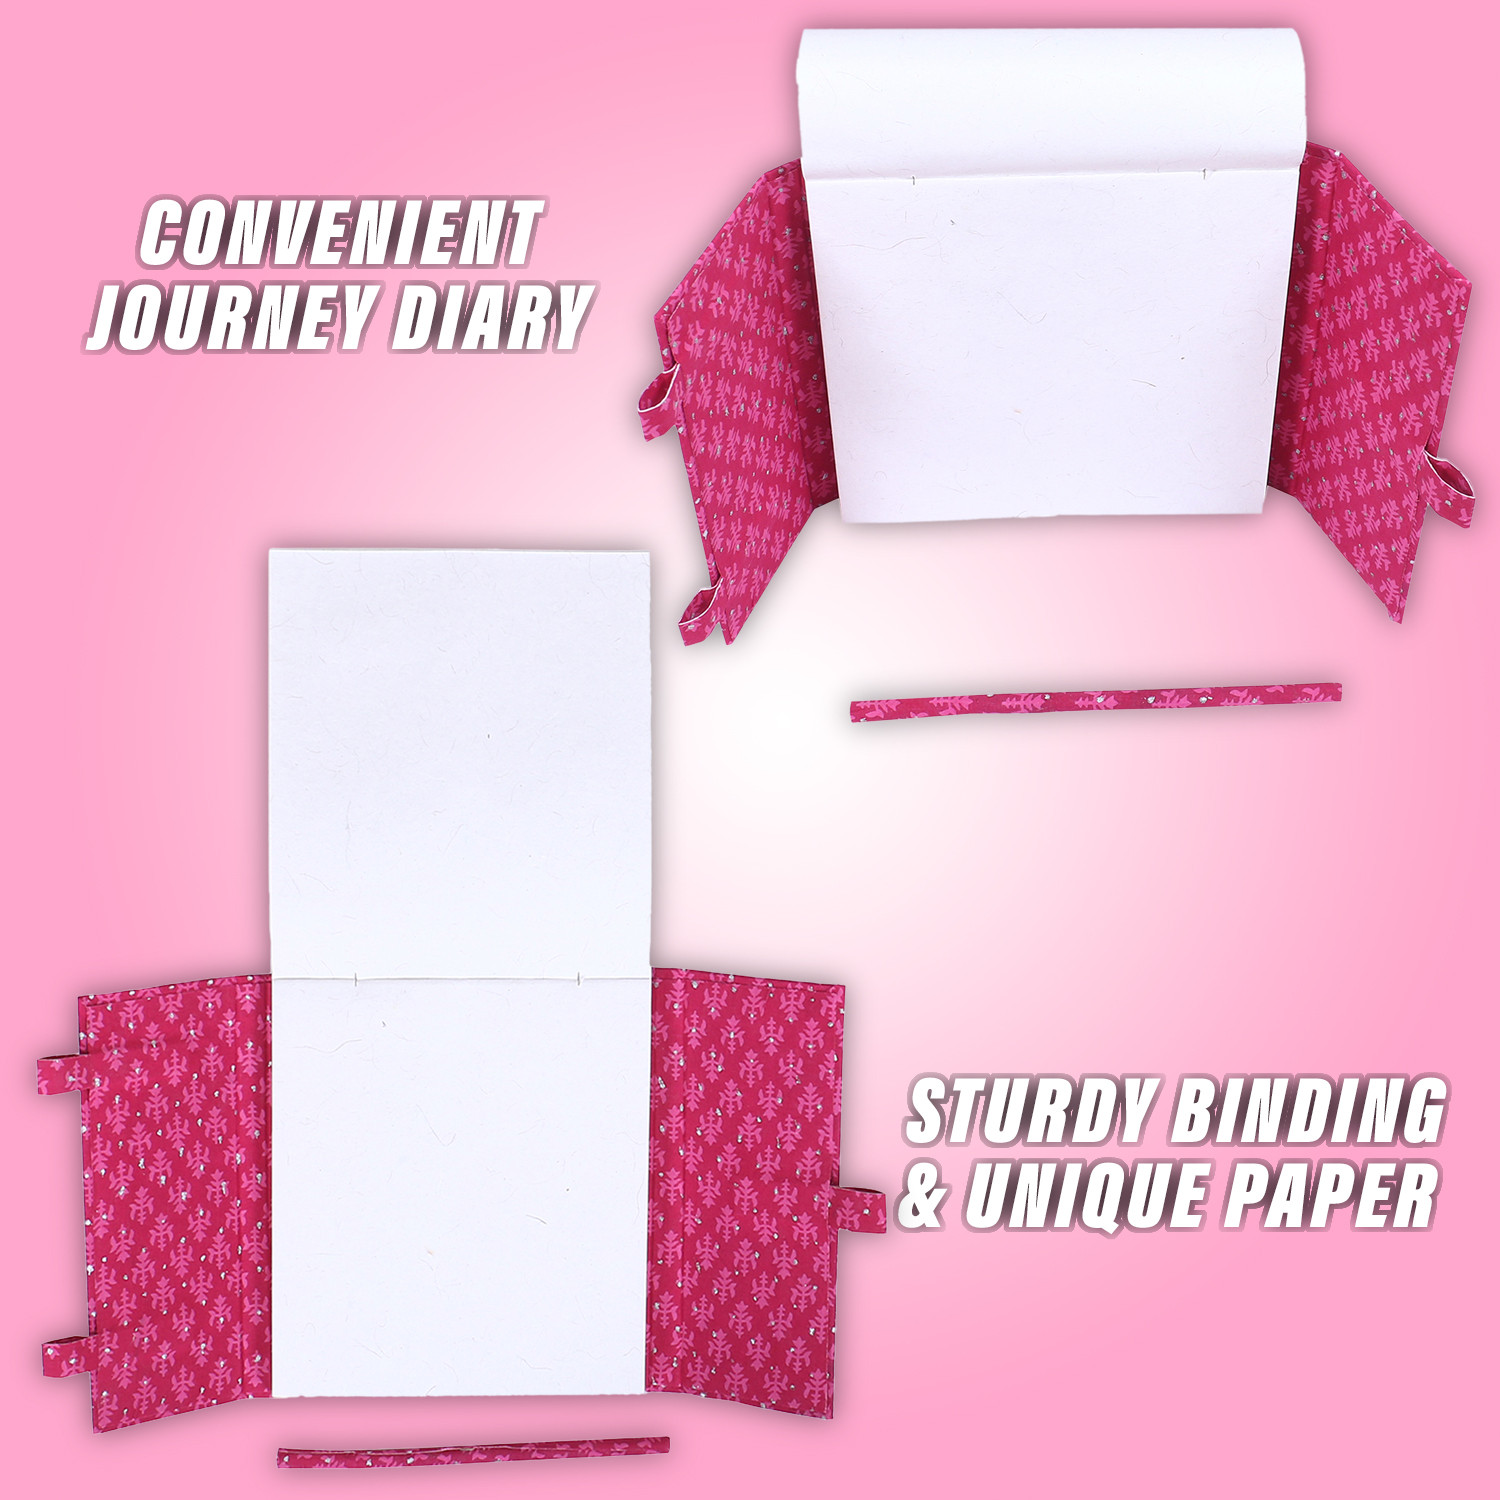 Kuber Industries Diary | Cardboard Travel Notebook | Diary for Journey | Pink Leaf Pen-Diary | Diary for Writing Thoughts & Memories | Relieve Stress | Pink